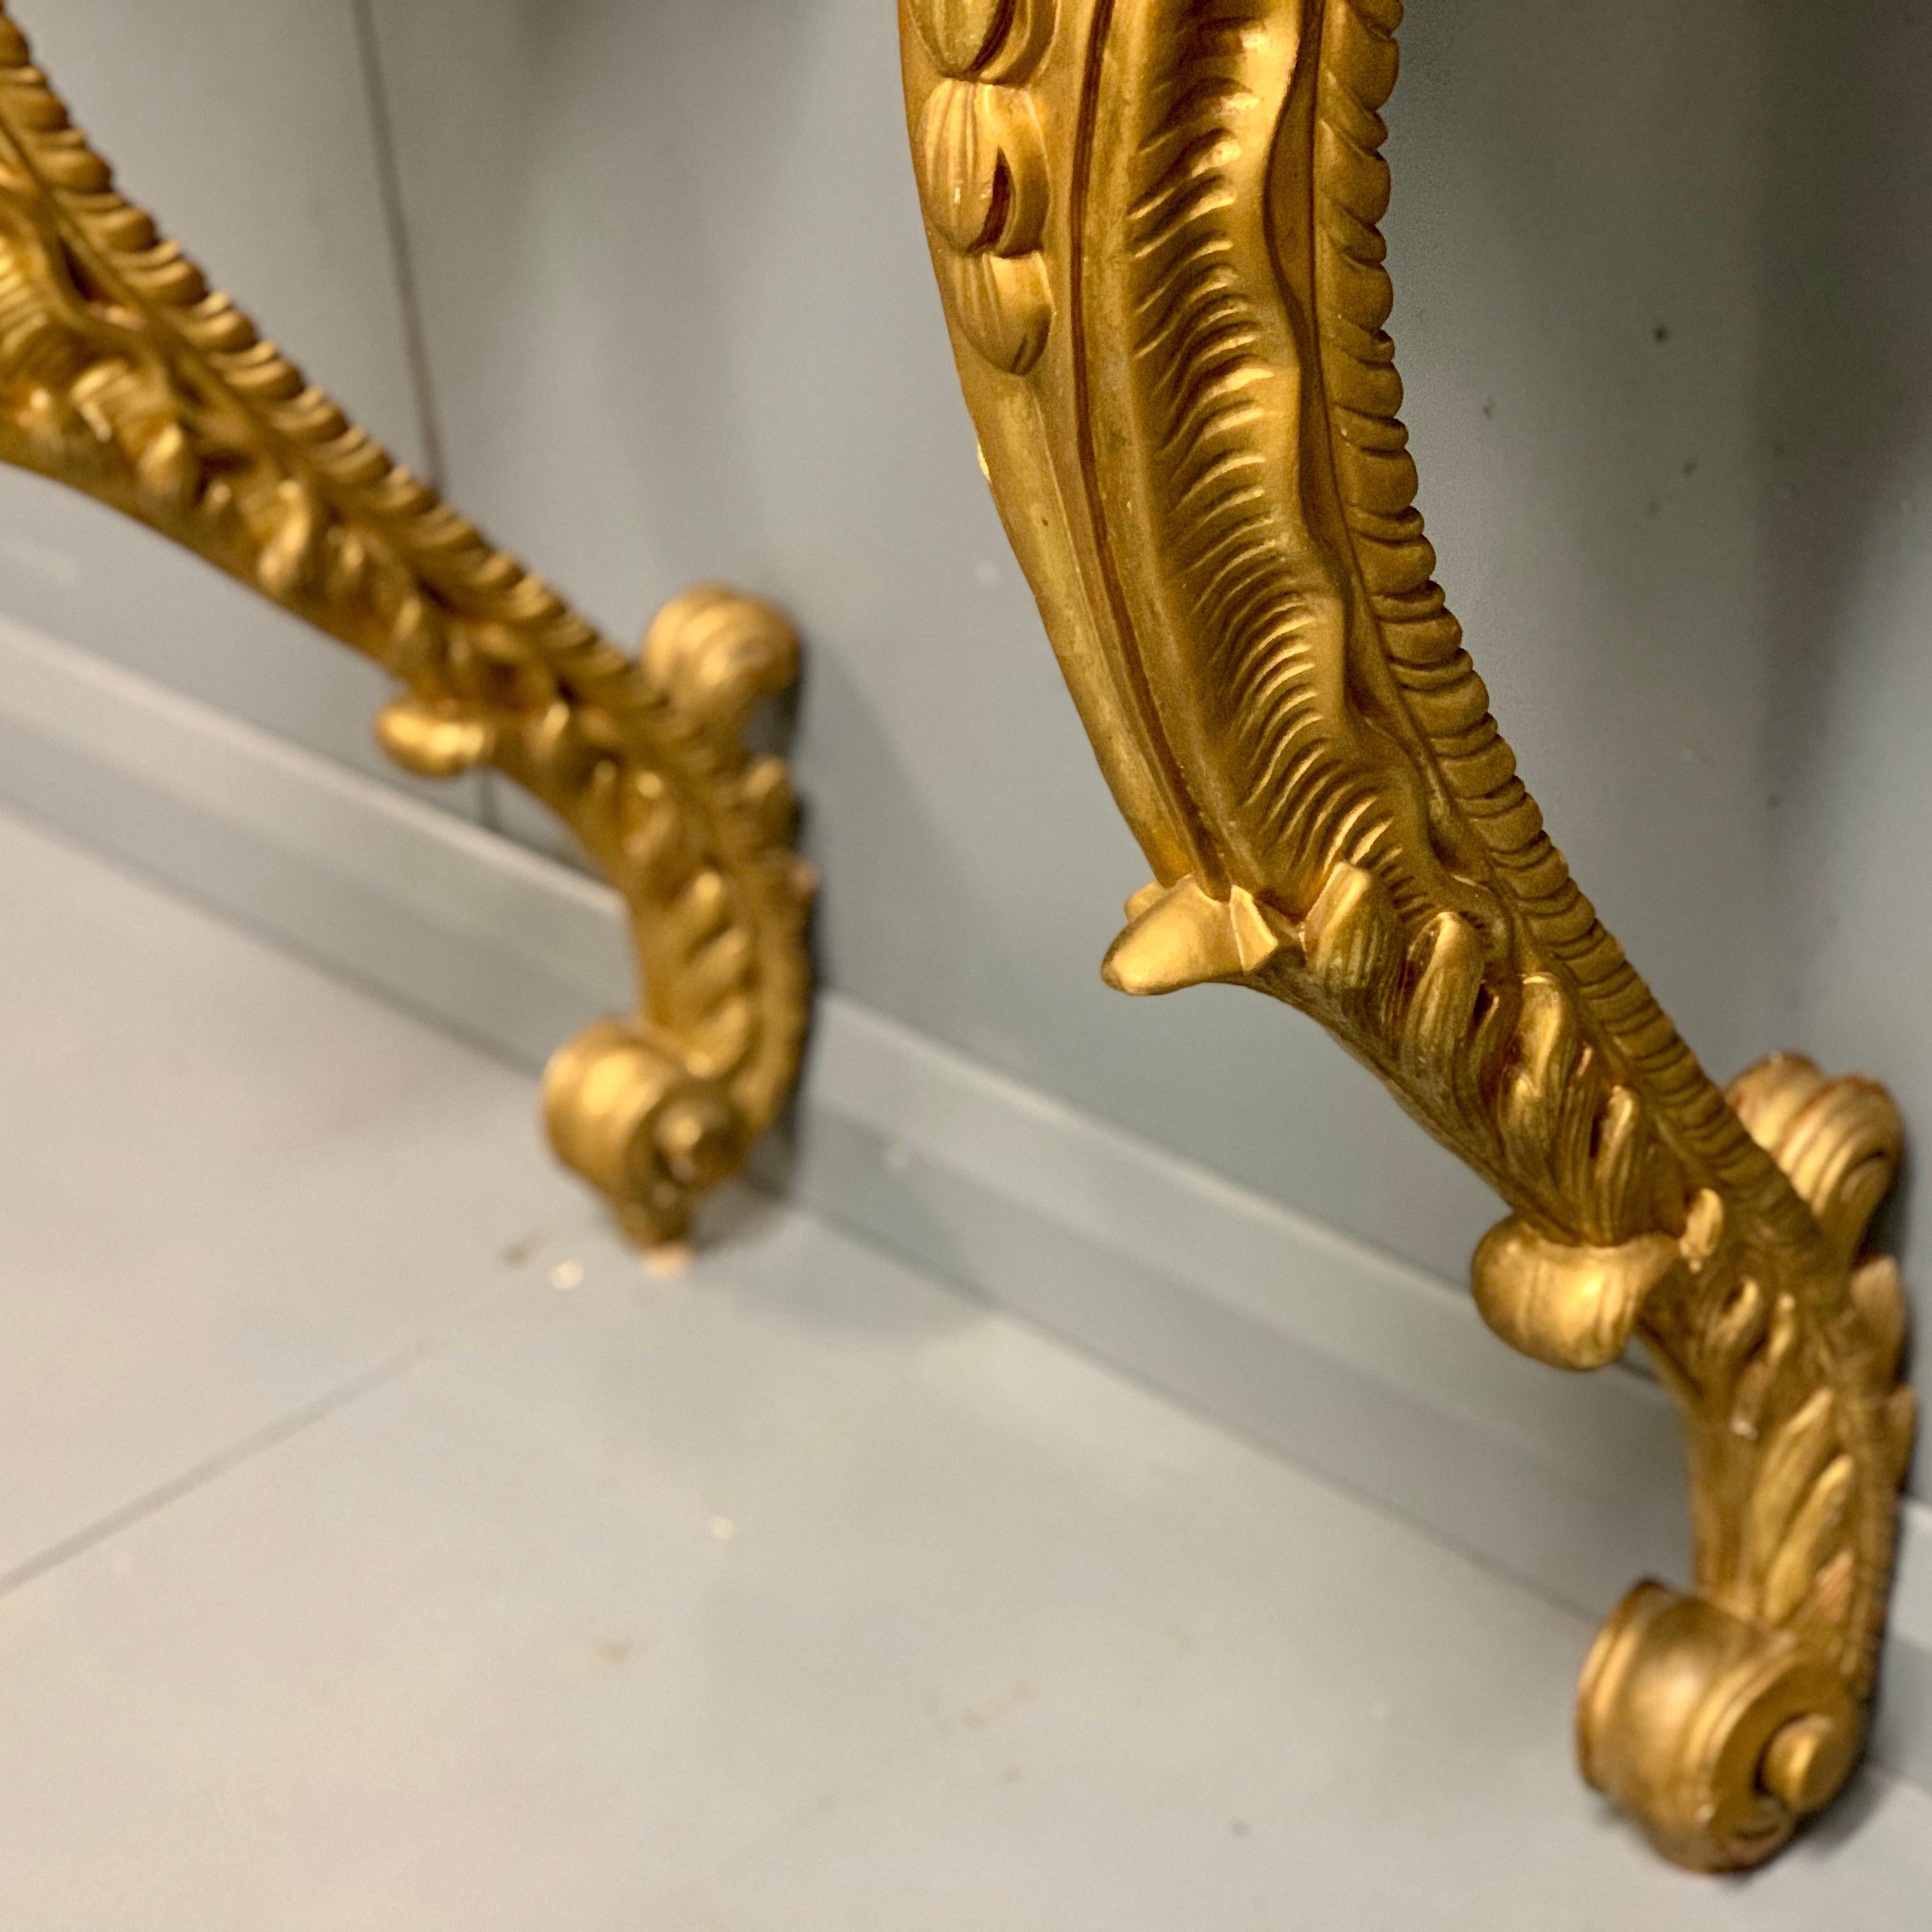 19th Century French Pair of Gilt Wall Mounted Console Tables with Marble Tops For Sale 2